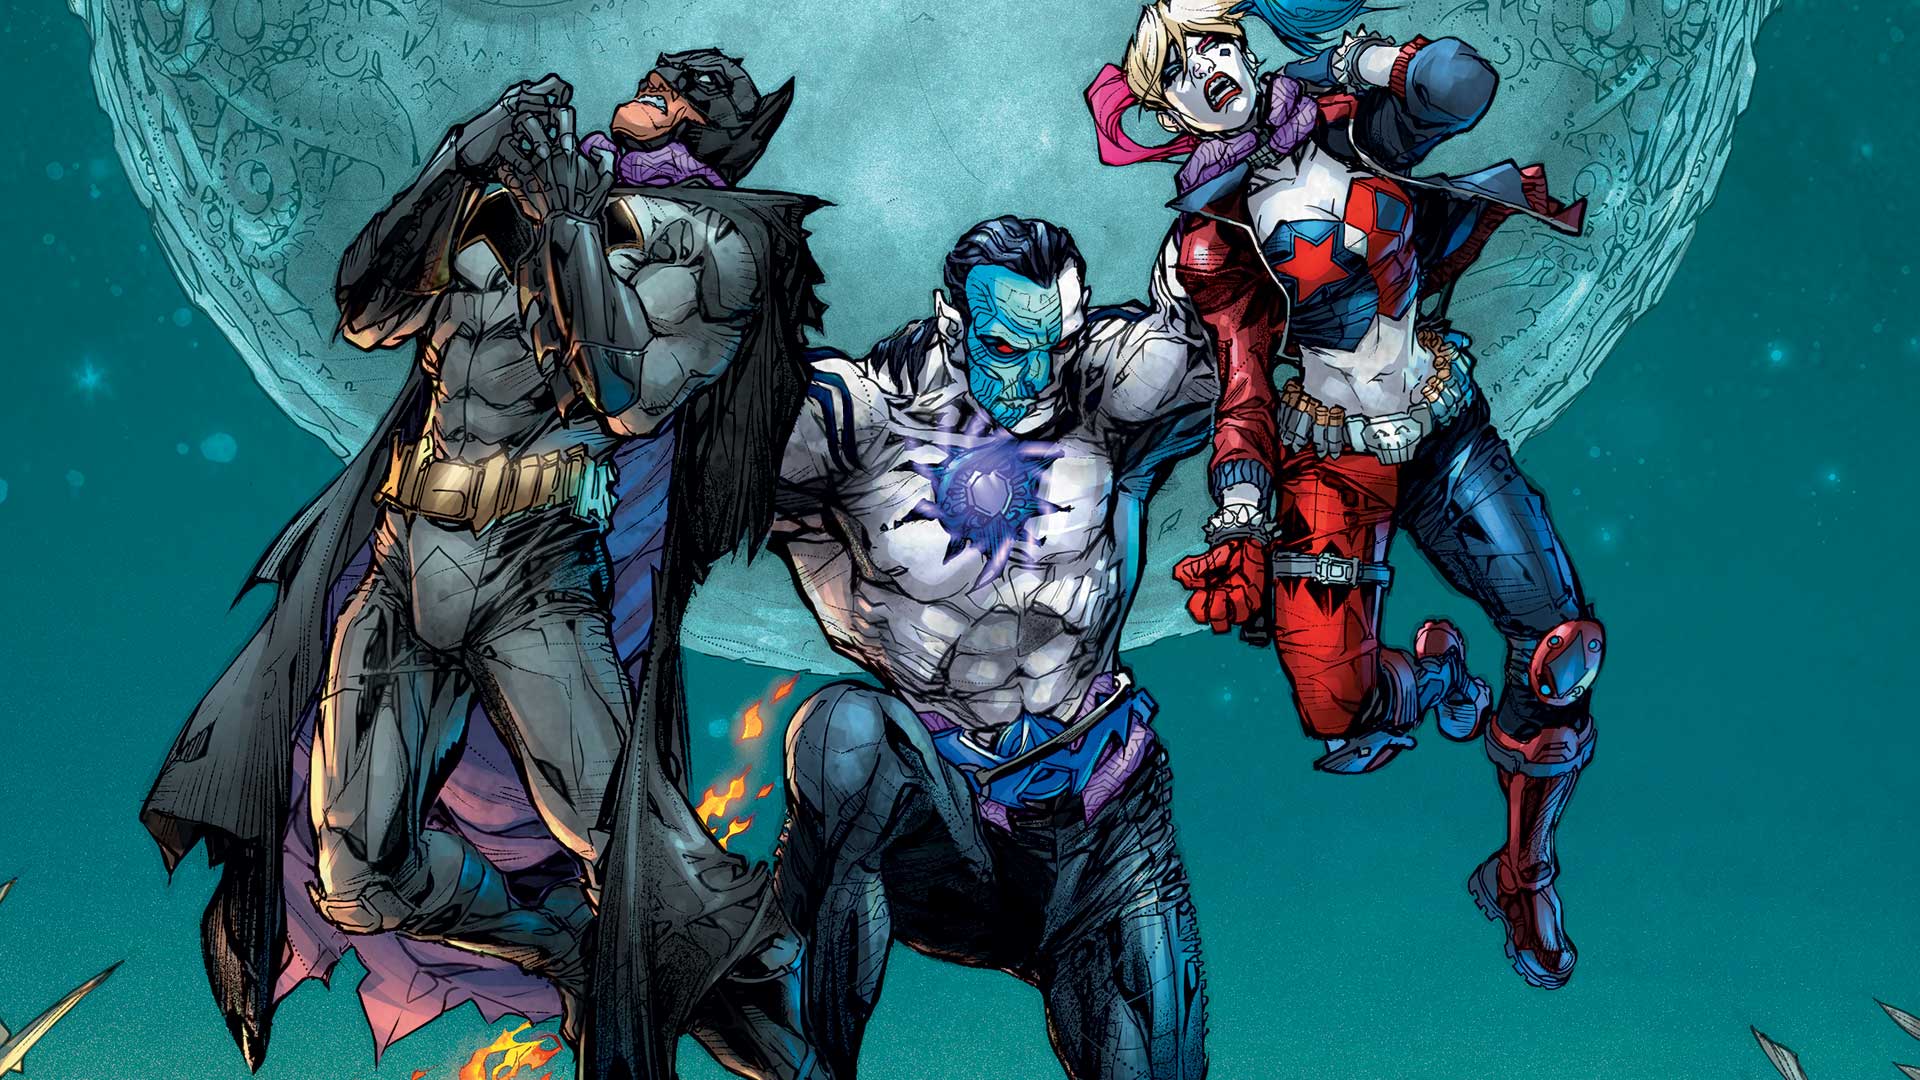 Eclipso In Justice League VS Suicide Squad Graphic Novel Review